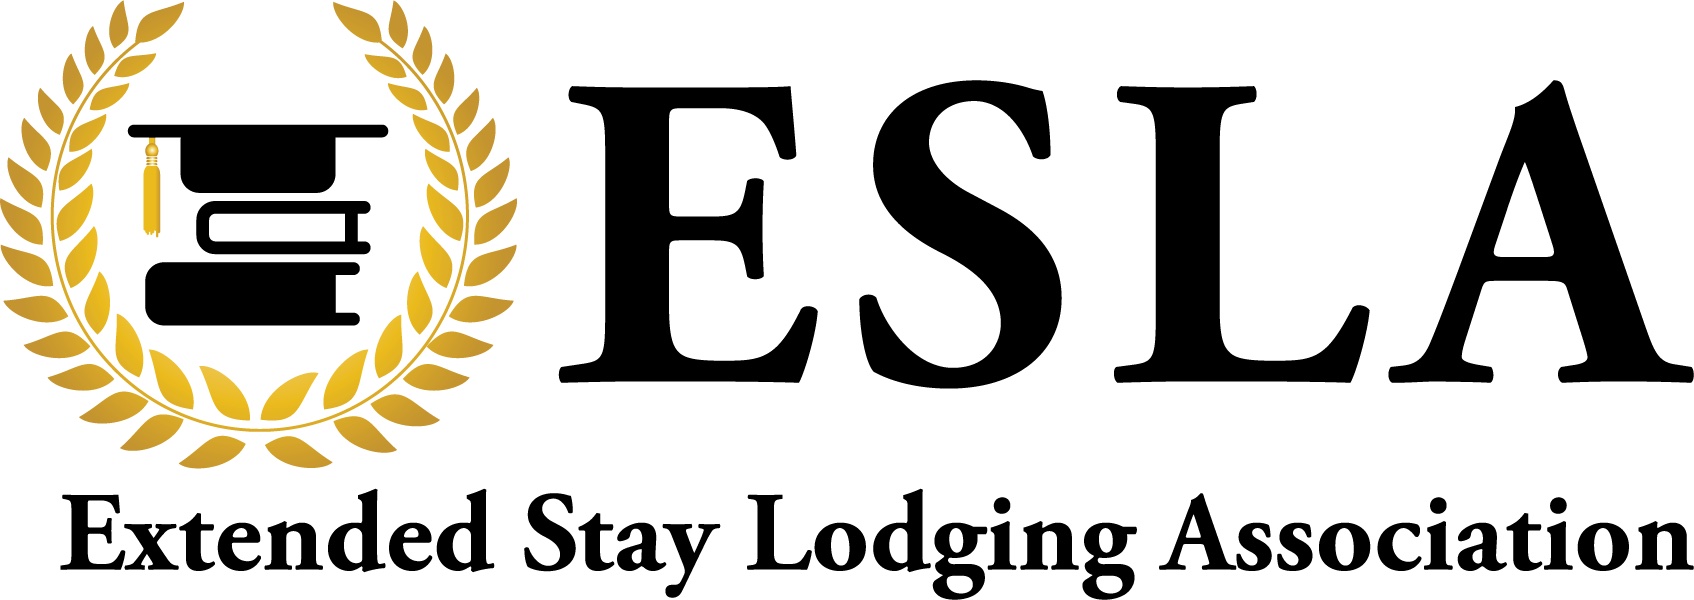 Extended Stay Lodging Association